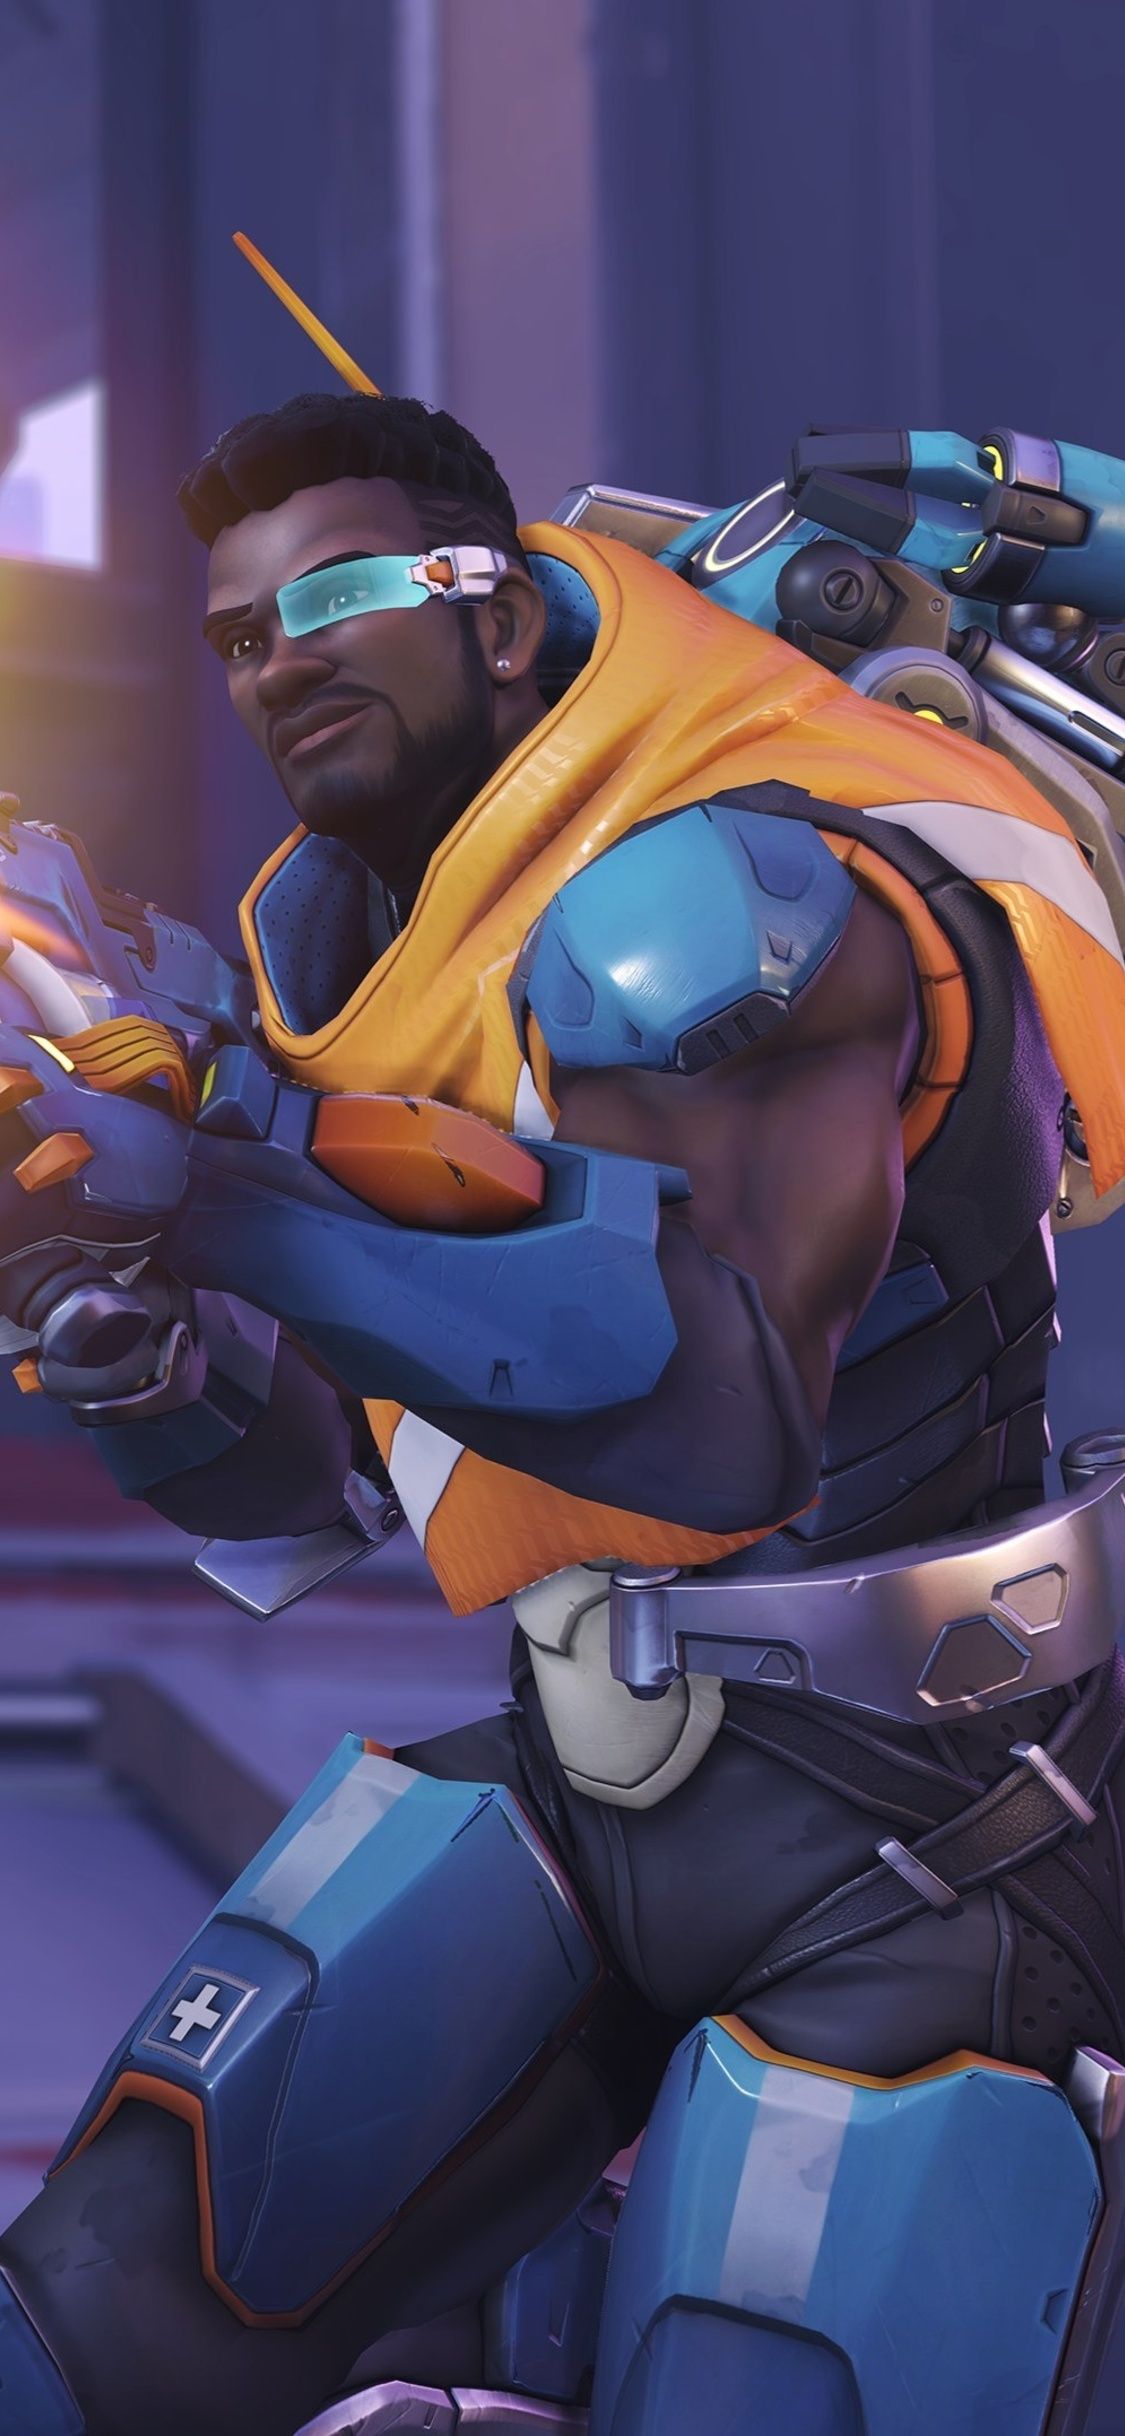 Baptiste Overwatch Video Game iPhone XS, iPhone iPhone X HD 4k Wallpaper, Image, Background, Photo and Picture